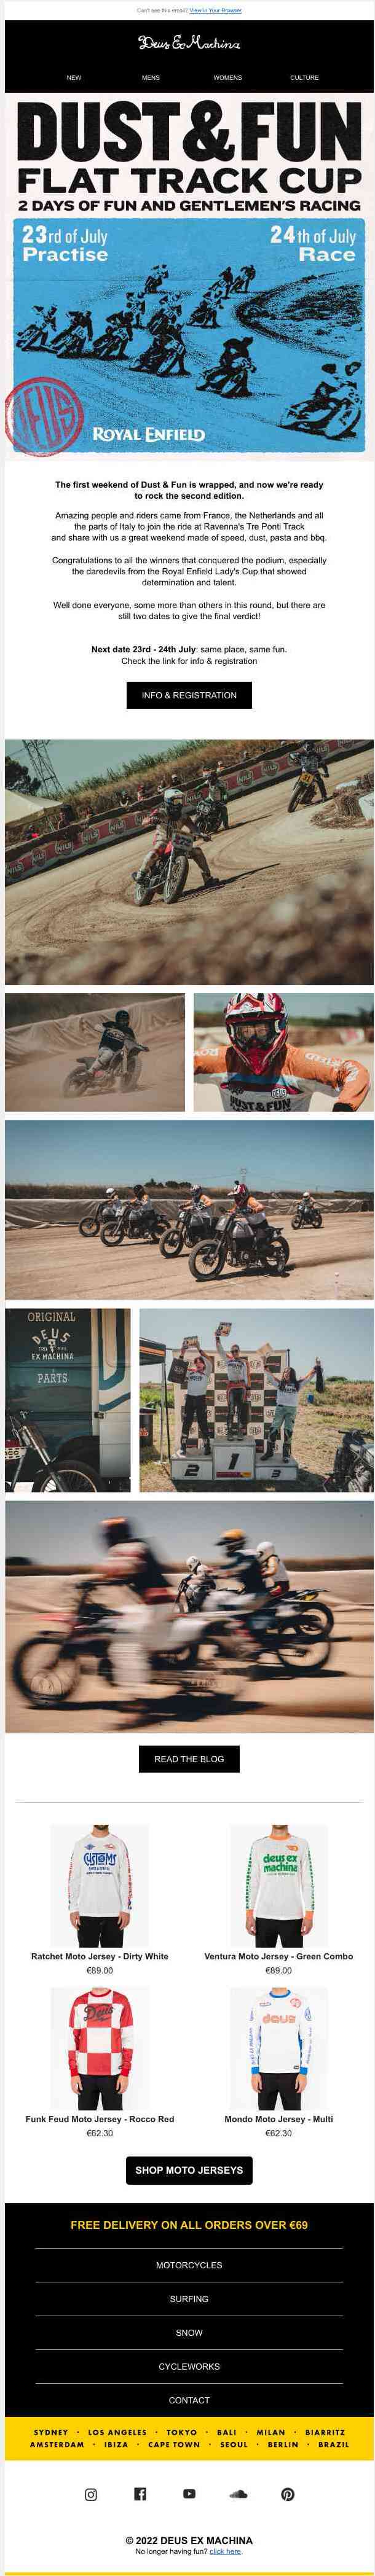 DUST & FUN FLAT TRACK CUP - Second Edition Coming